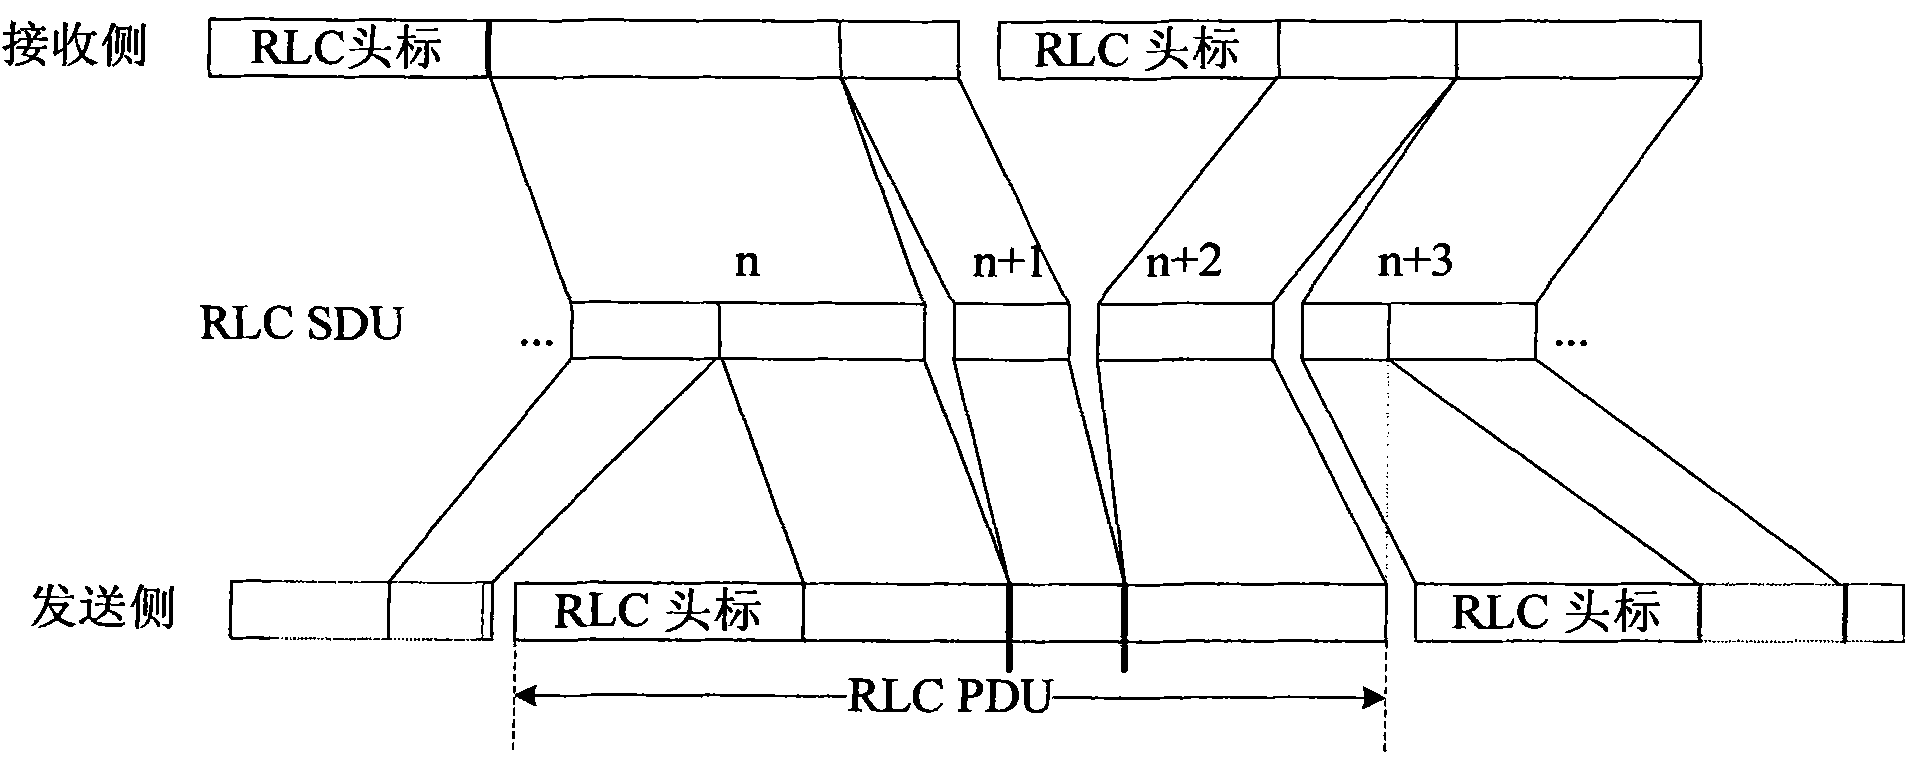 System and method for transmitting data between service gateway and relay terminals